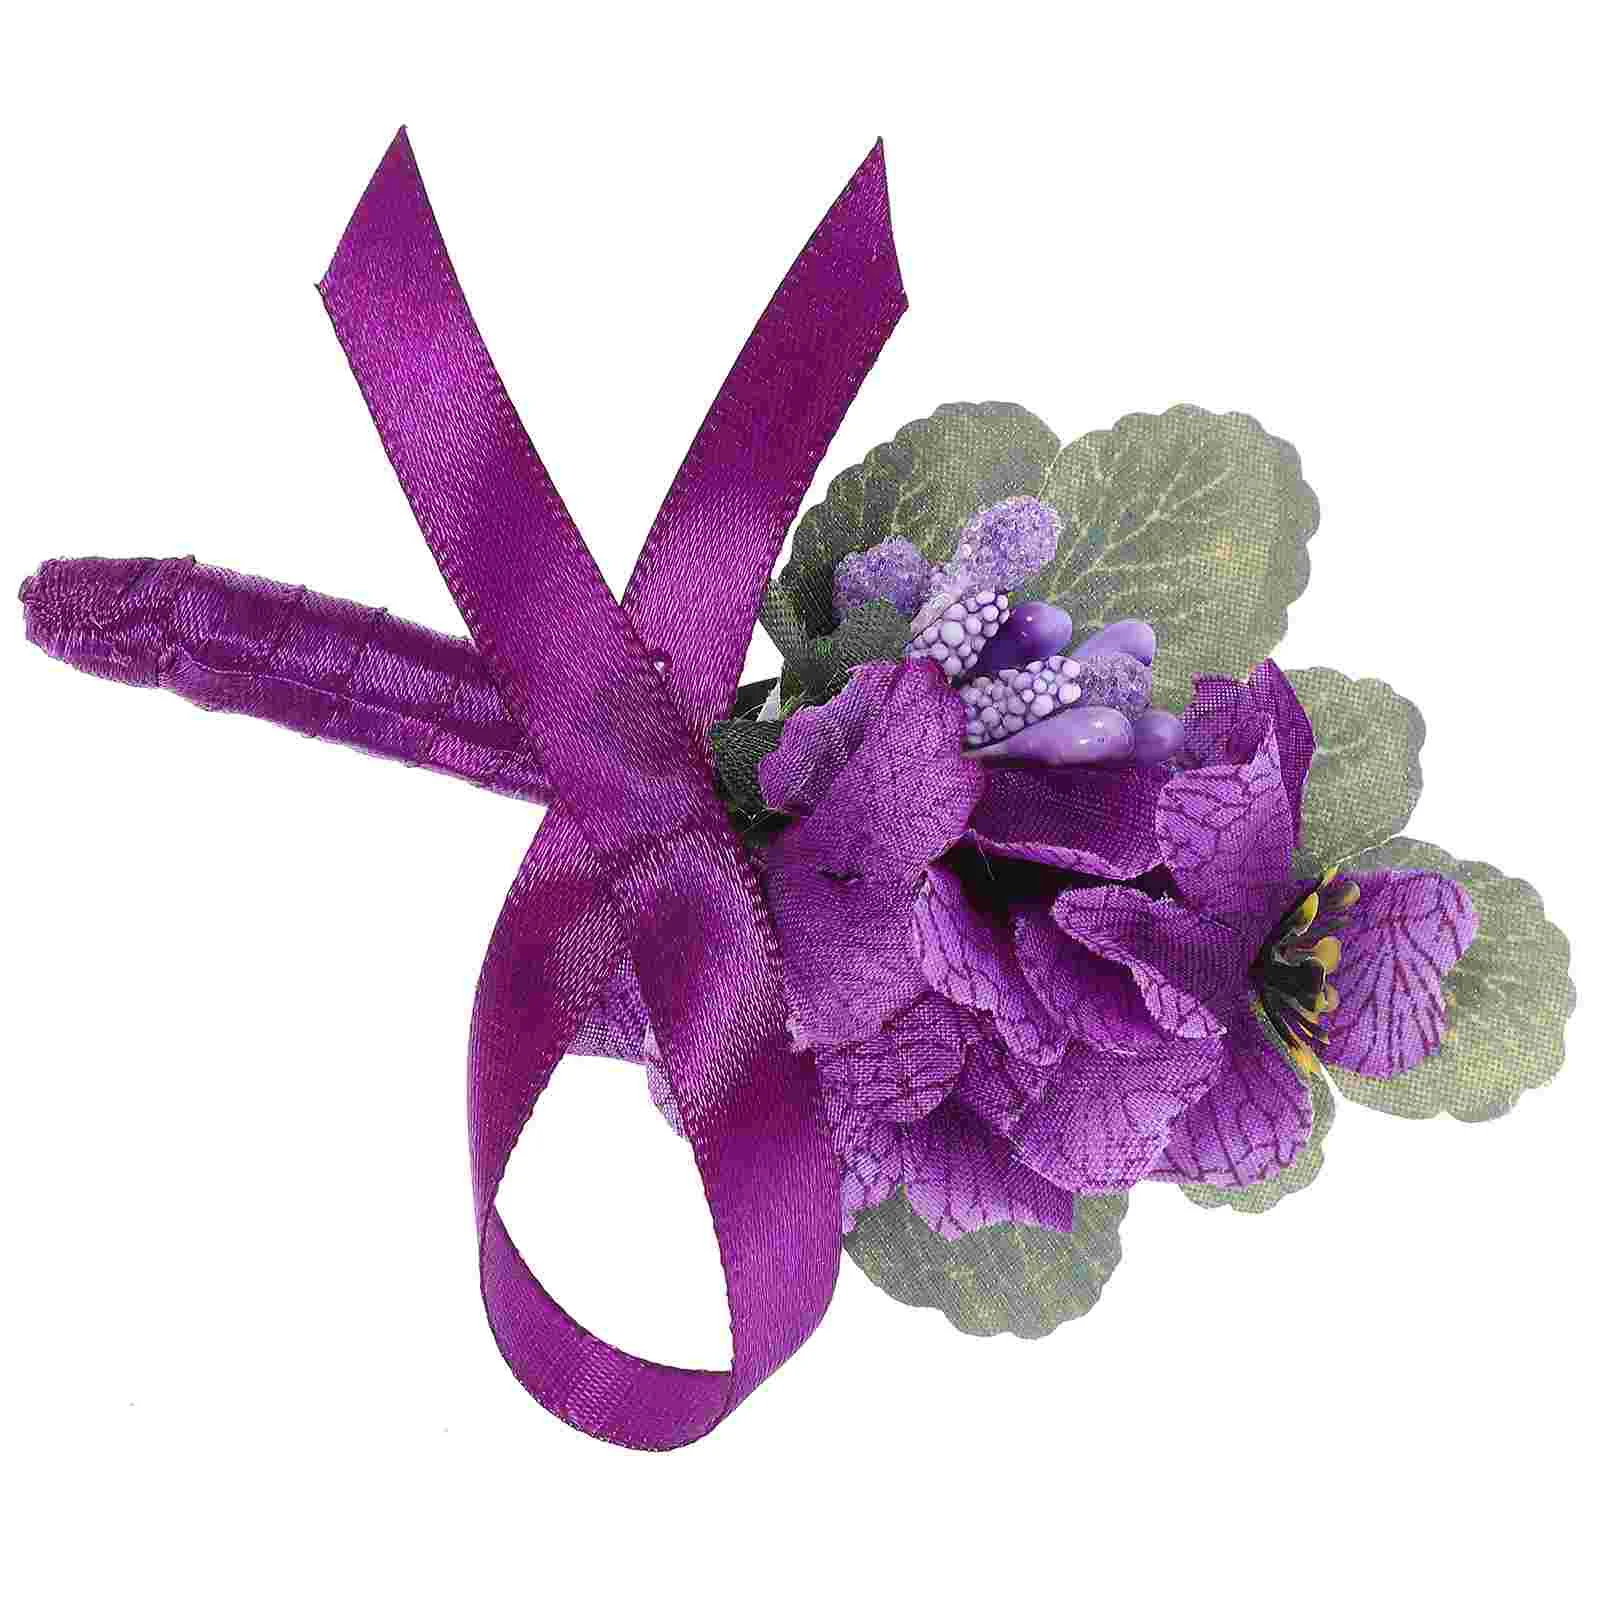 Men's Corsage Flower Lapel Pin Violets Groom Boutonniere for Wedding Gift Brooch Suit Man 5piece lot rose red satin flowers corsage wedding prom ceremony flower brooch crystal wedding groom bttonhole boutonniere xh0038